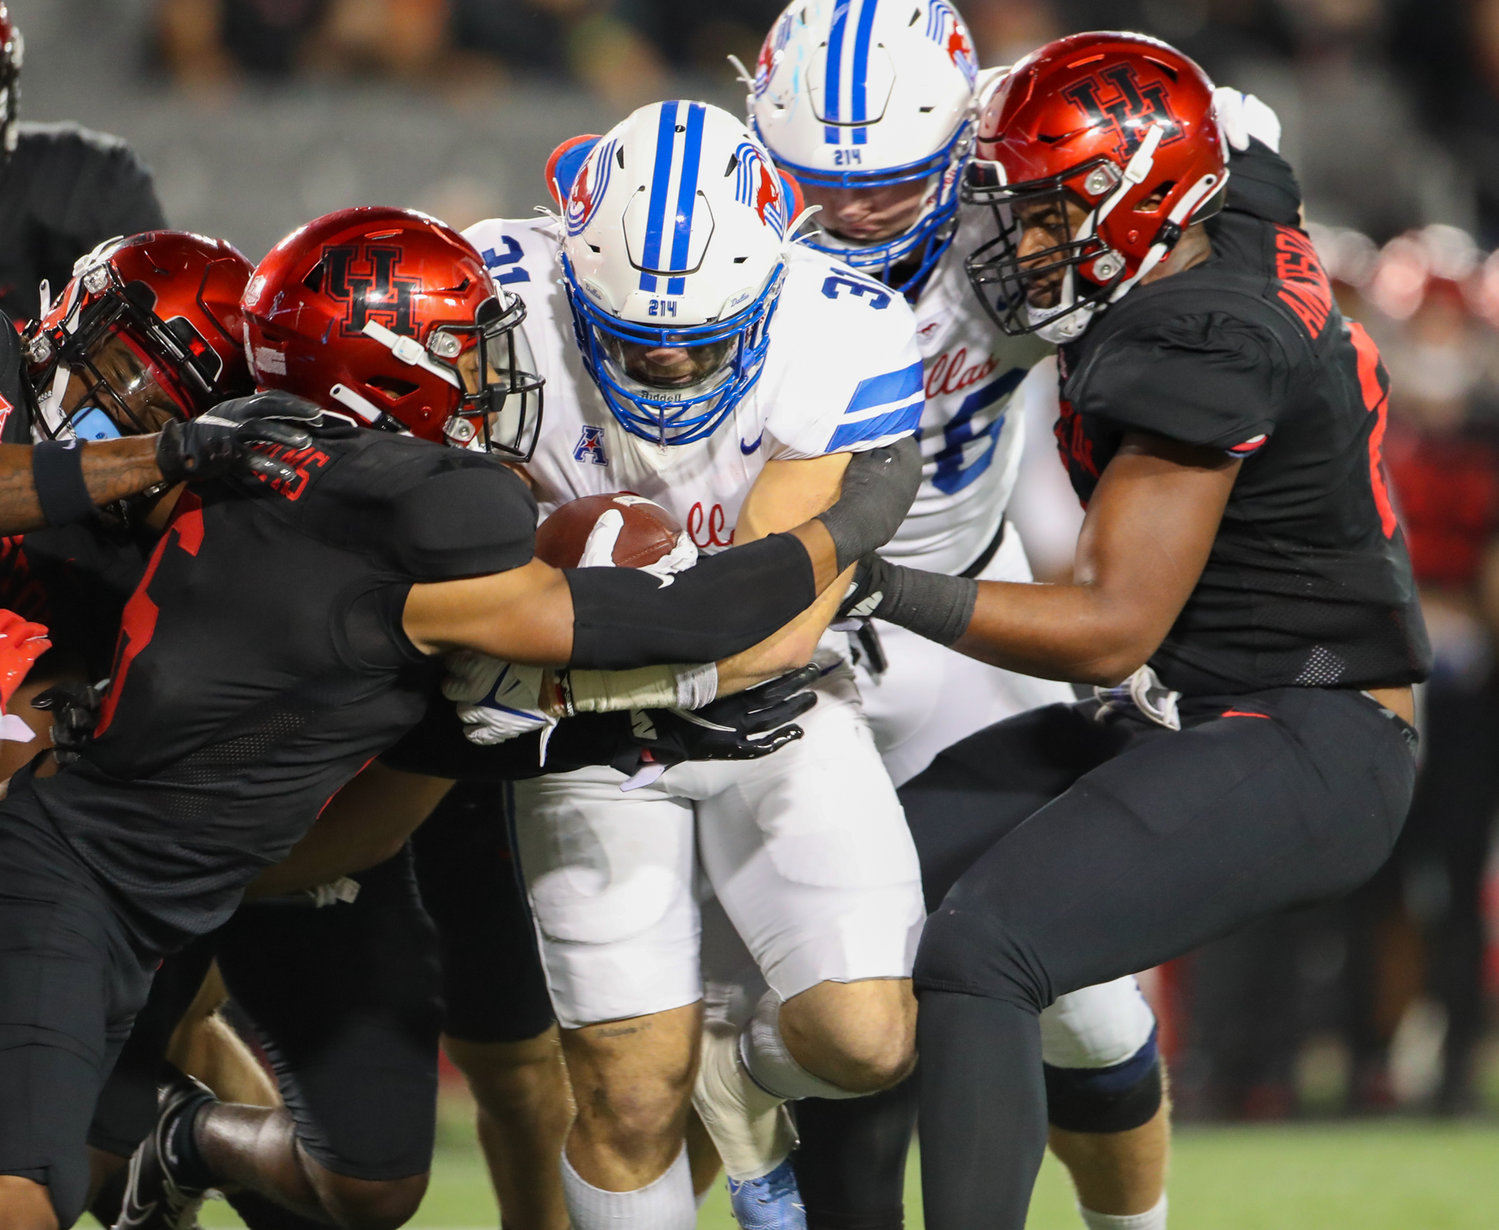 SMU Mustangs running back Tyler Lavine (31) is tackled on a carry during an NCAA football game between Houston and SMU on October 30, 2021 in Houston, Texas.